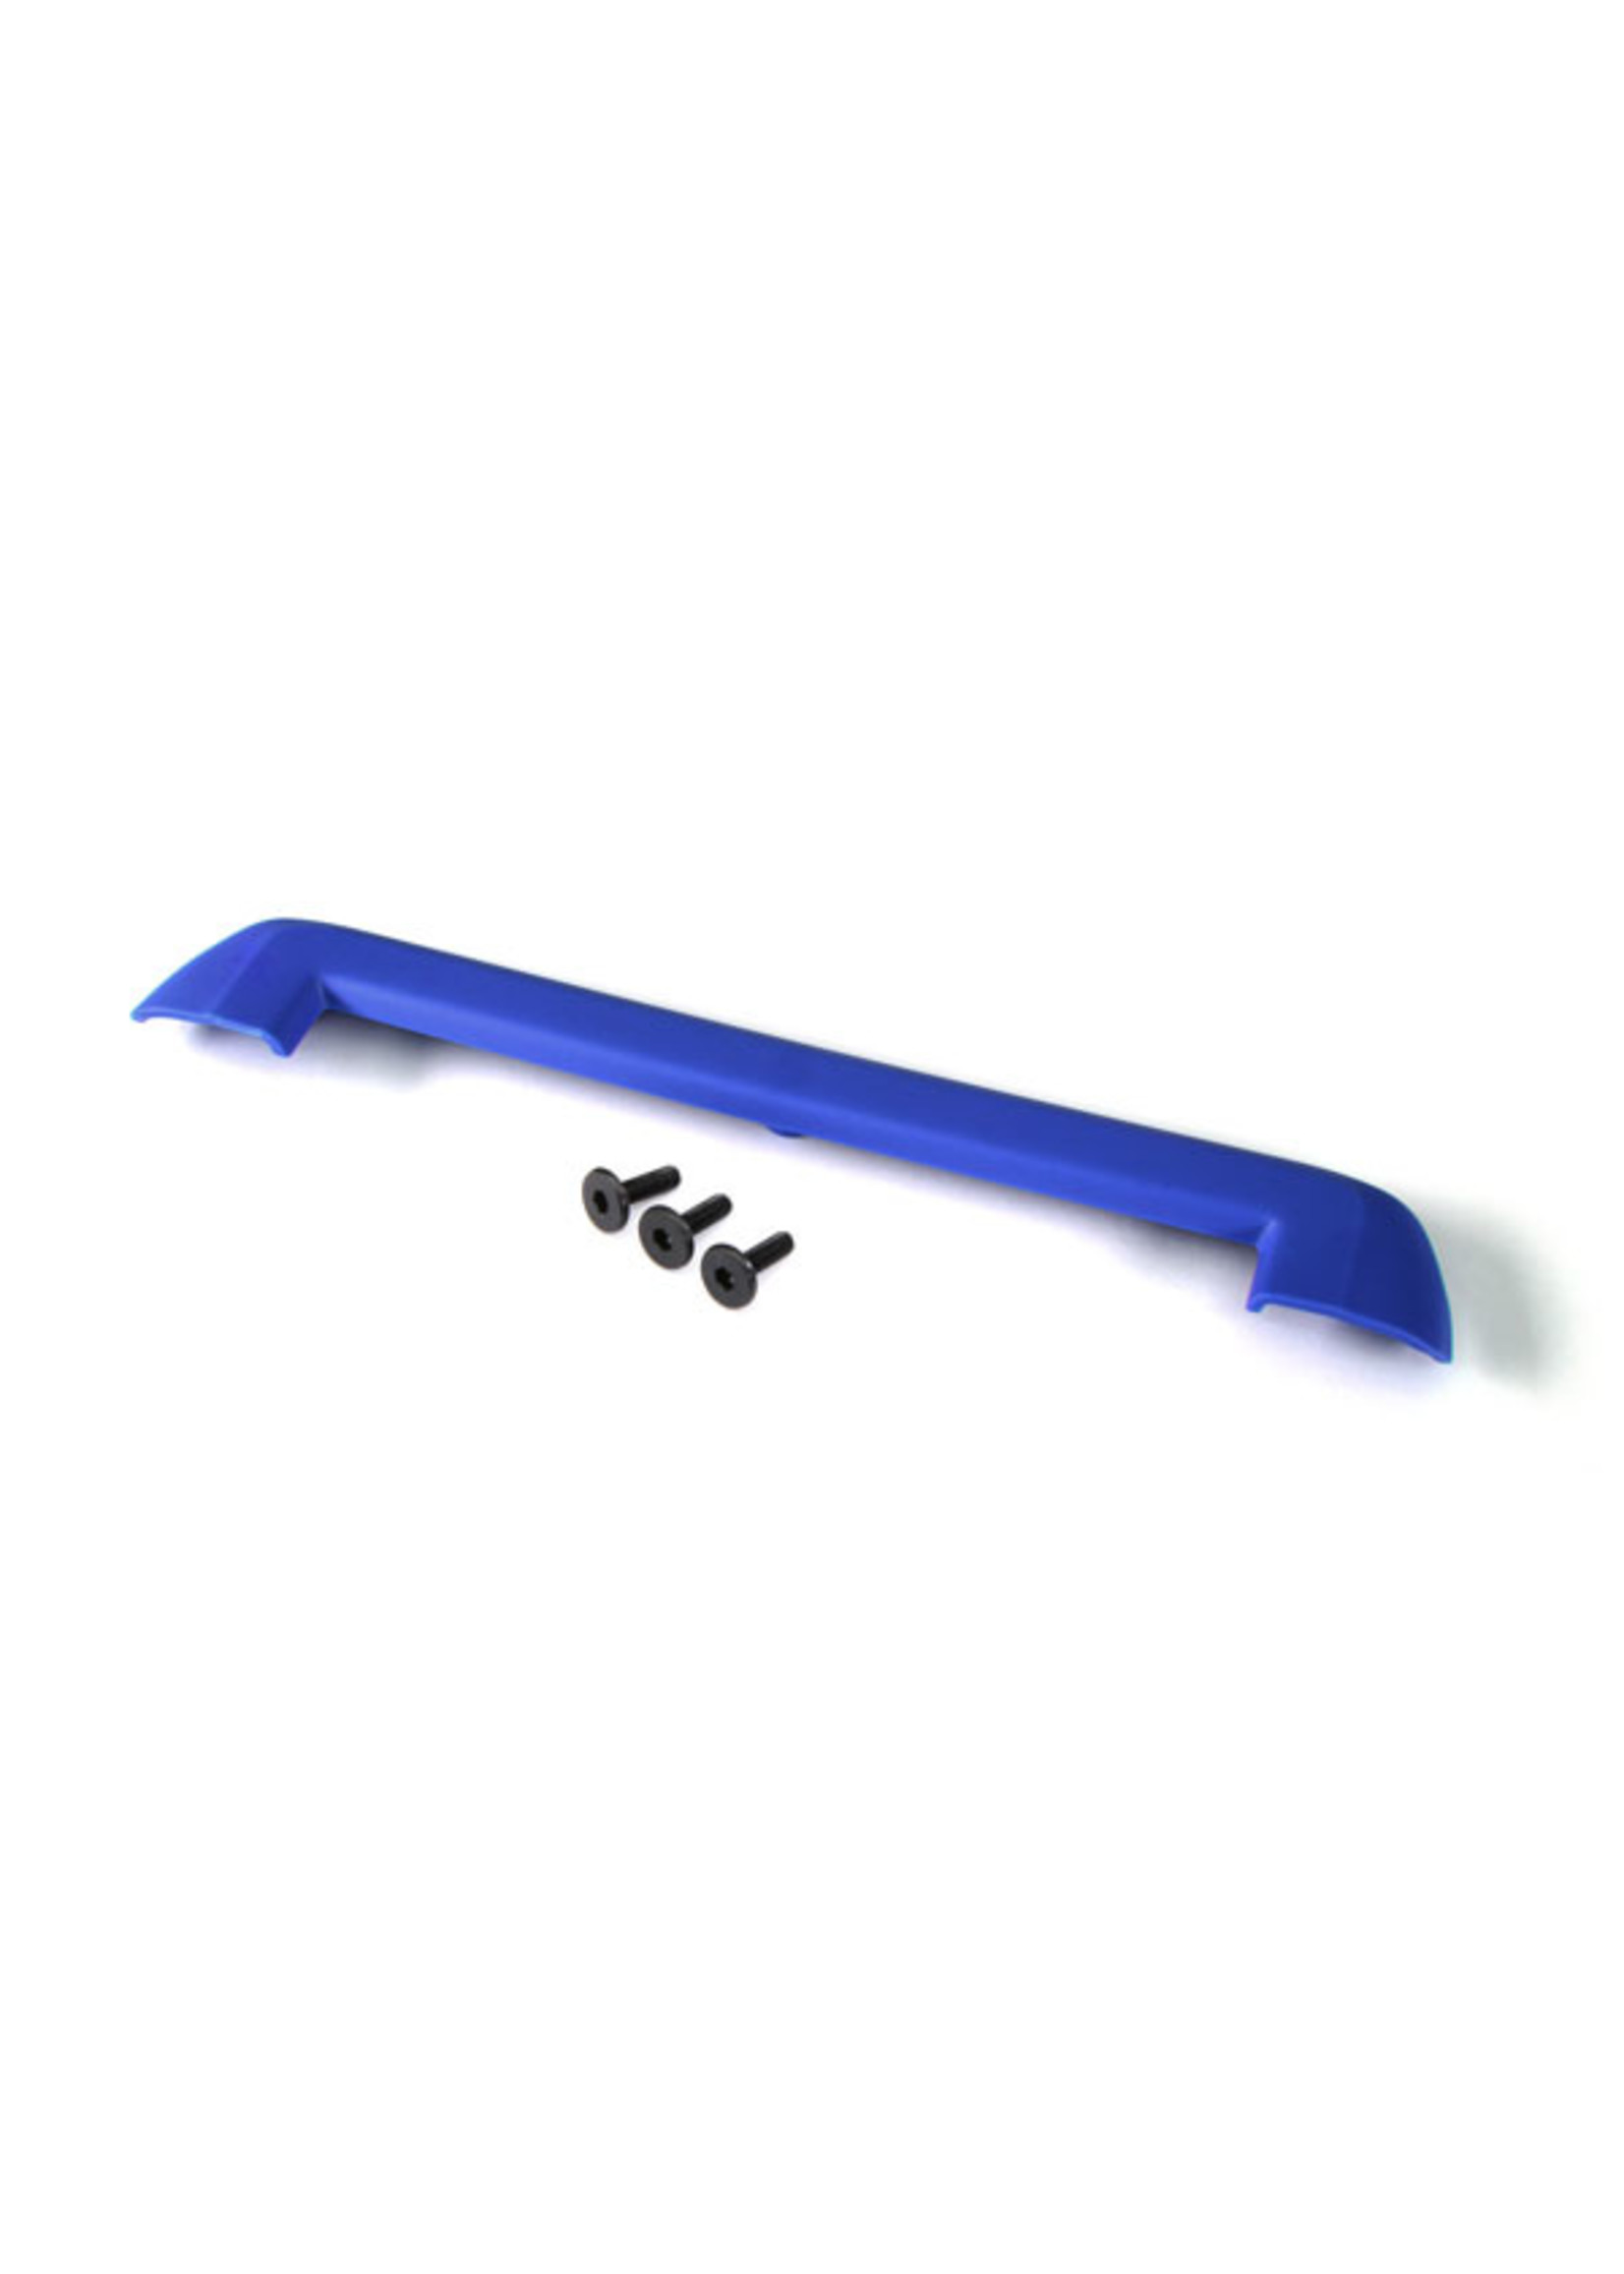 Traxxas 8912X - Tailgate Protector - Blue